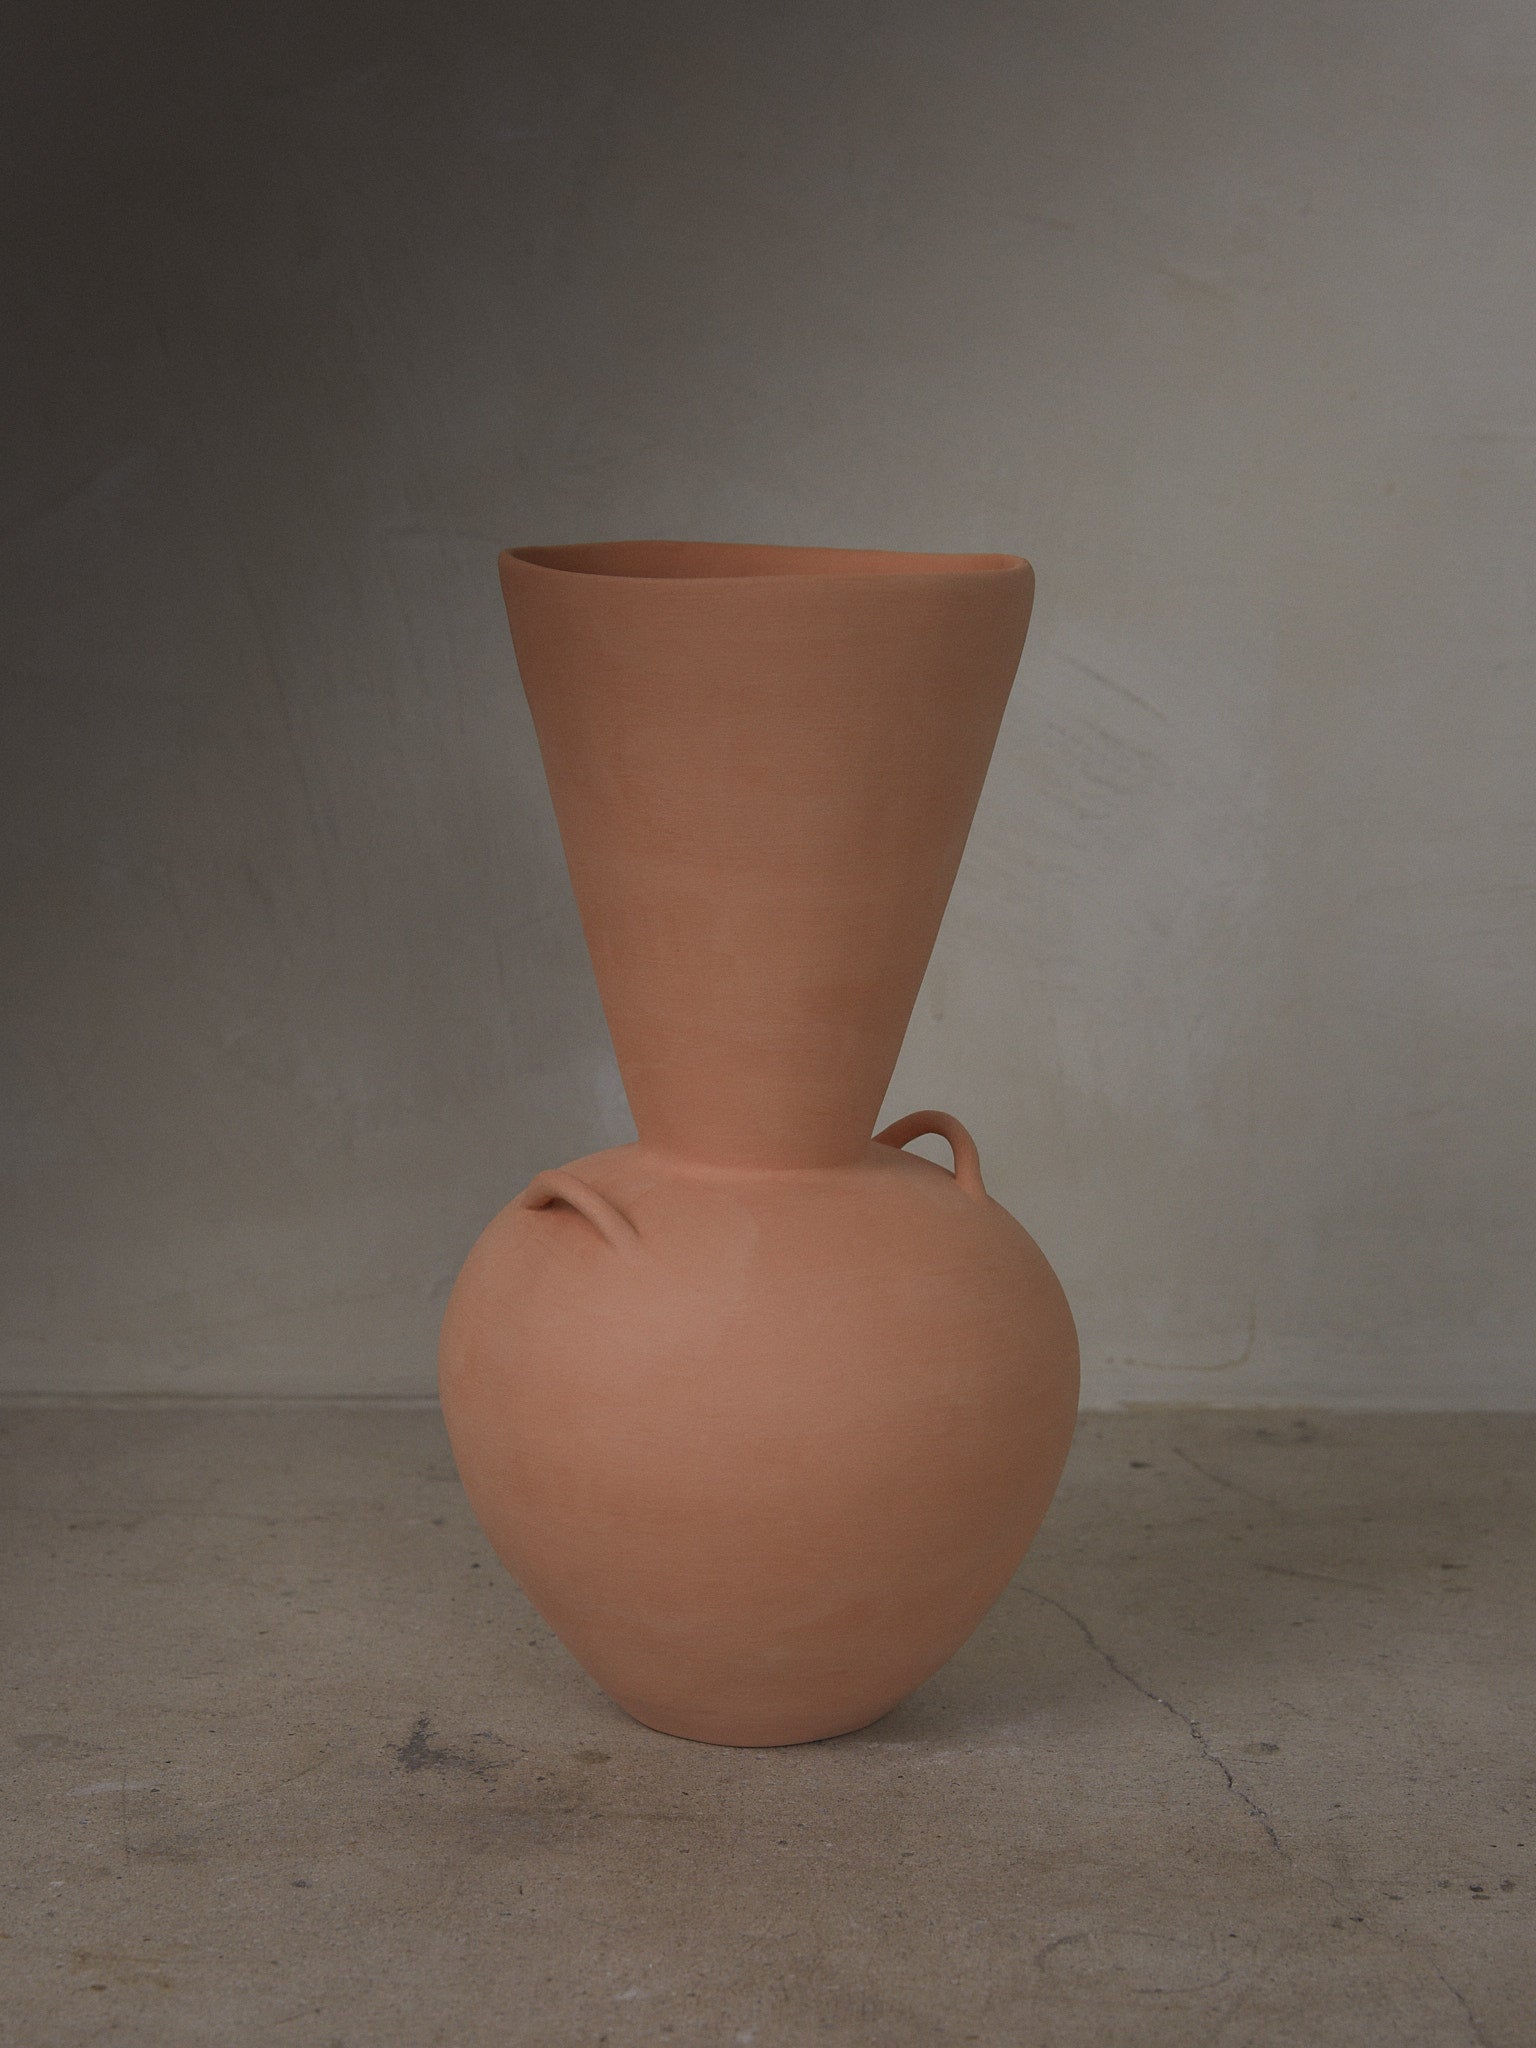 Terracotta Vase. Handmade terracotta vase with low, rounded bodice, stately neck and decorative side handles created with a modeling technique featuring traces of the artistic process.